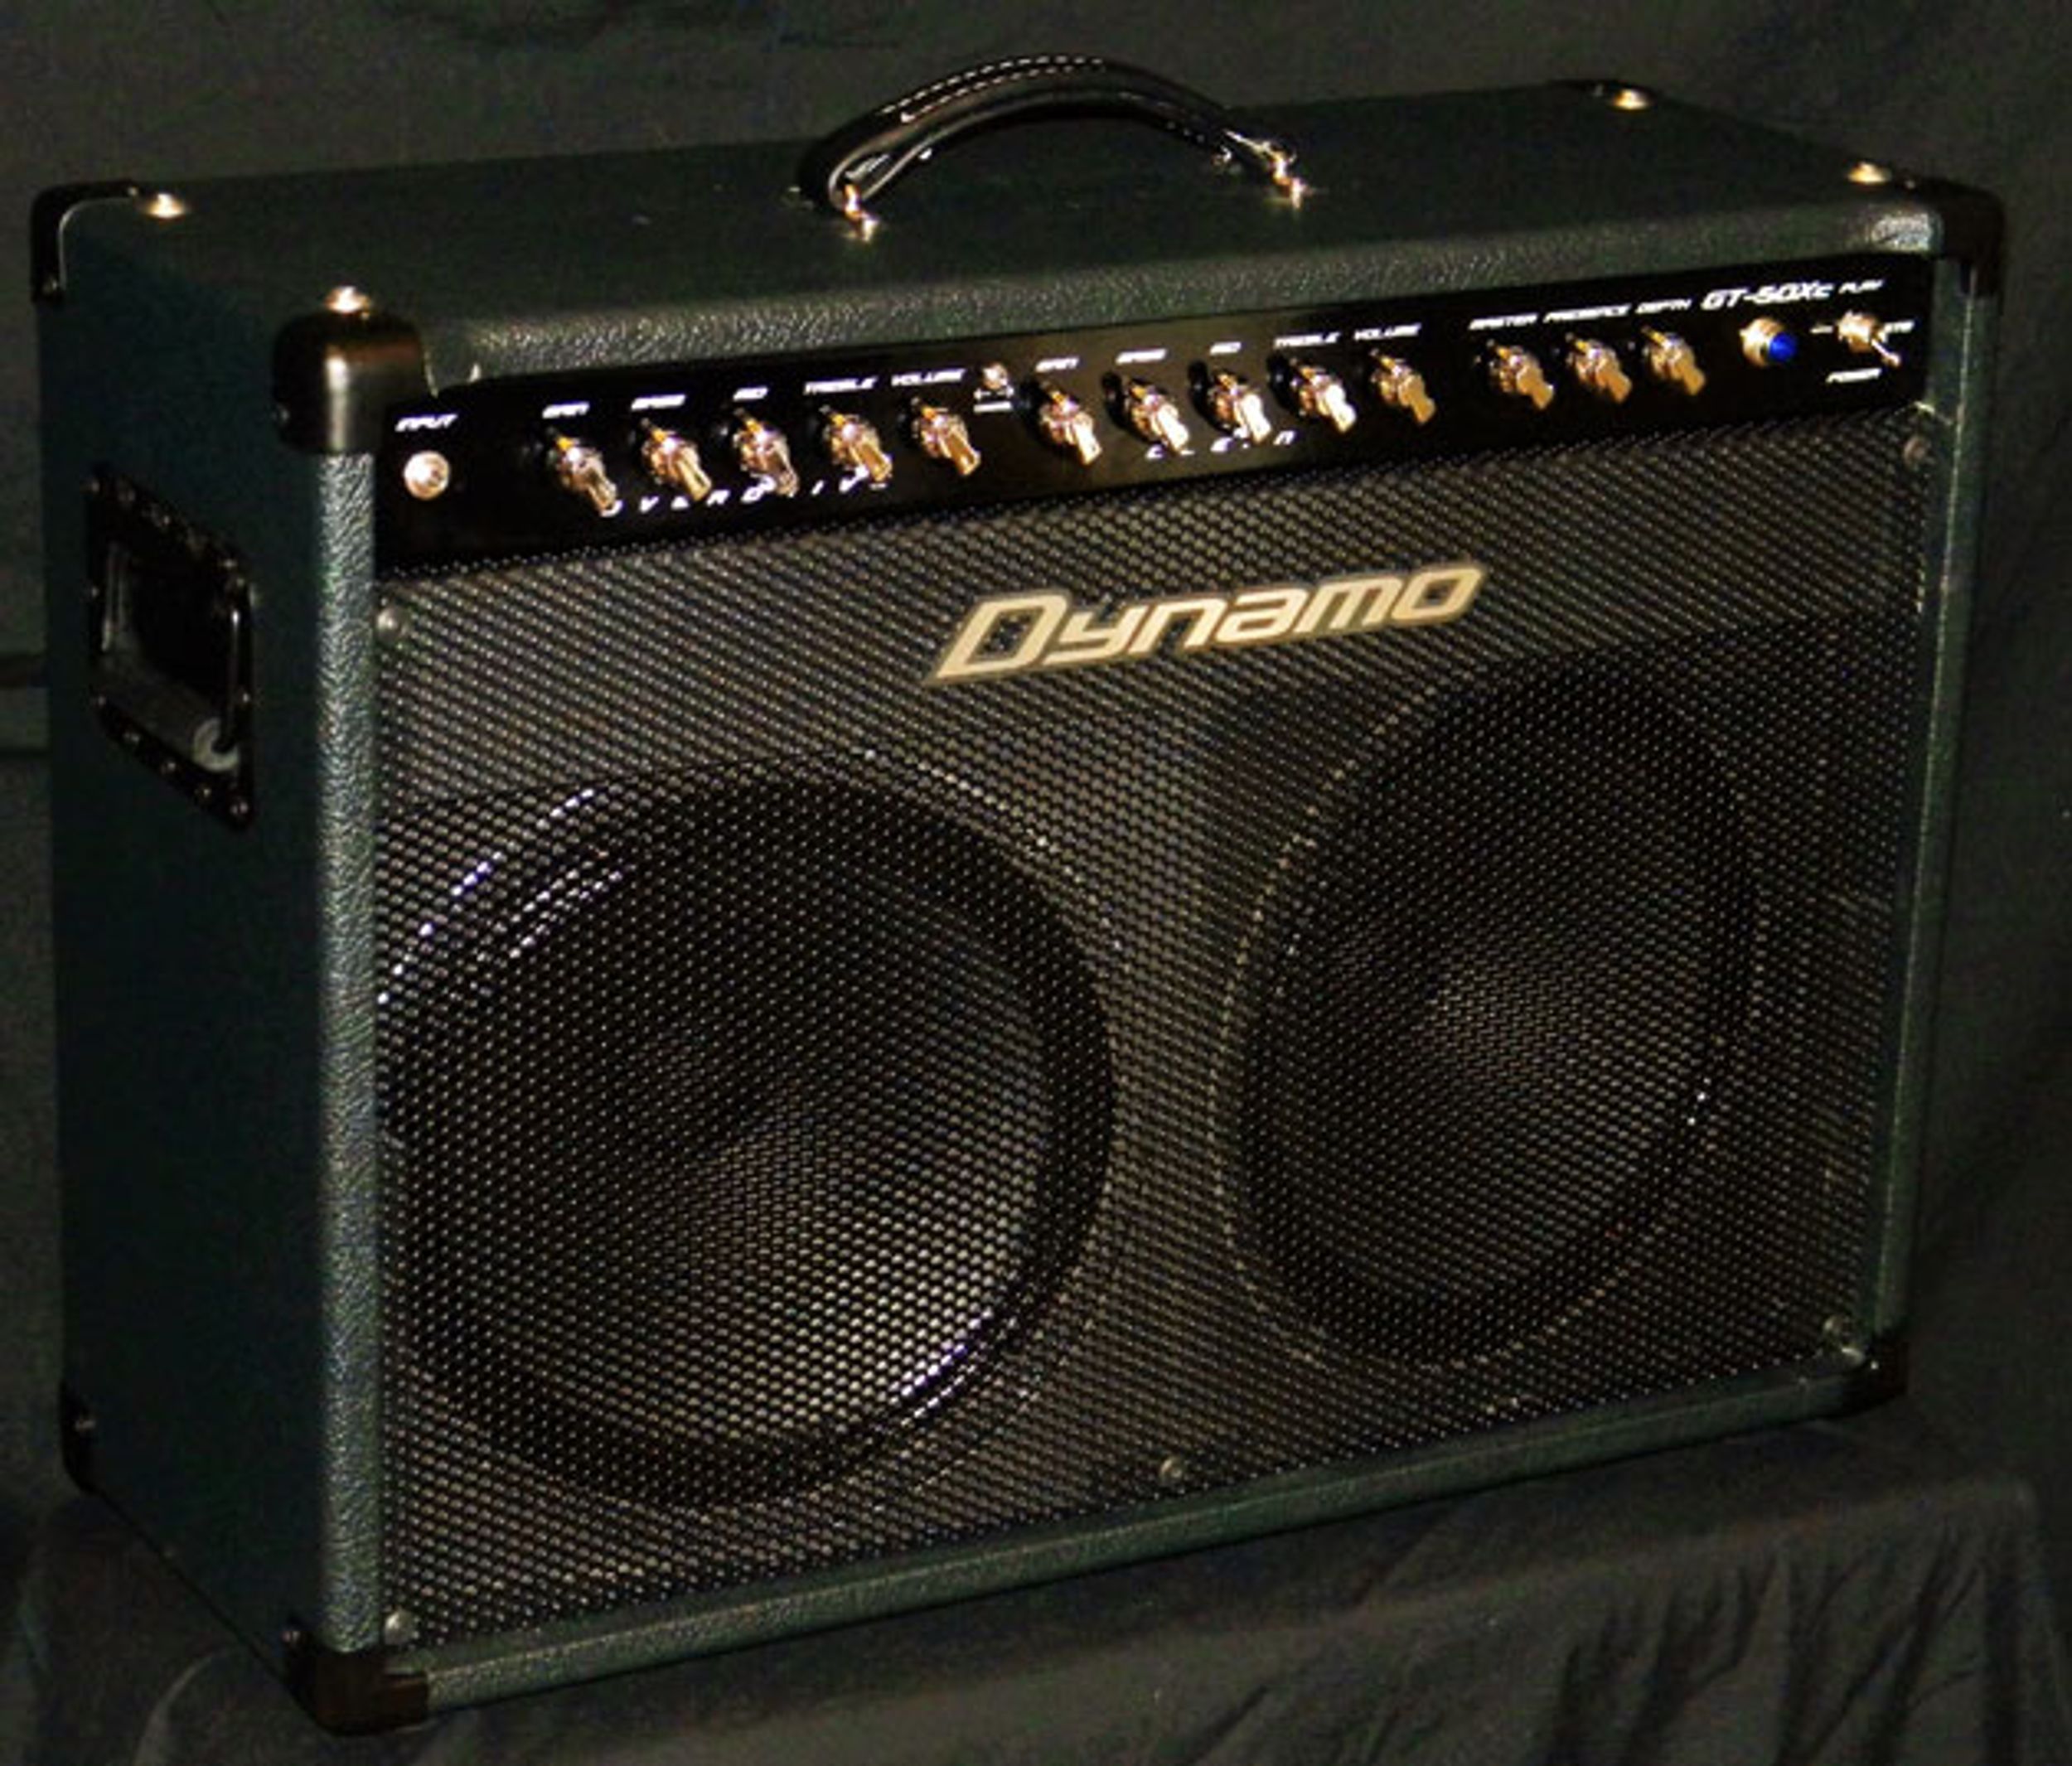 Dynamo Amplification Introduces the GT120x and GT50Xc 212 Combo